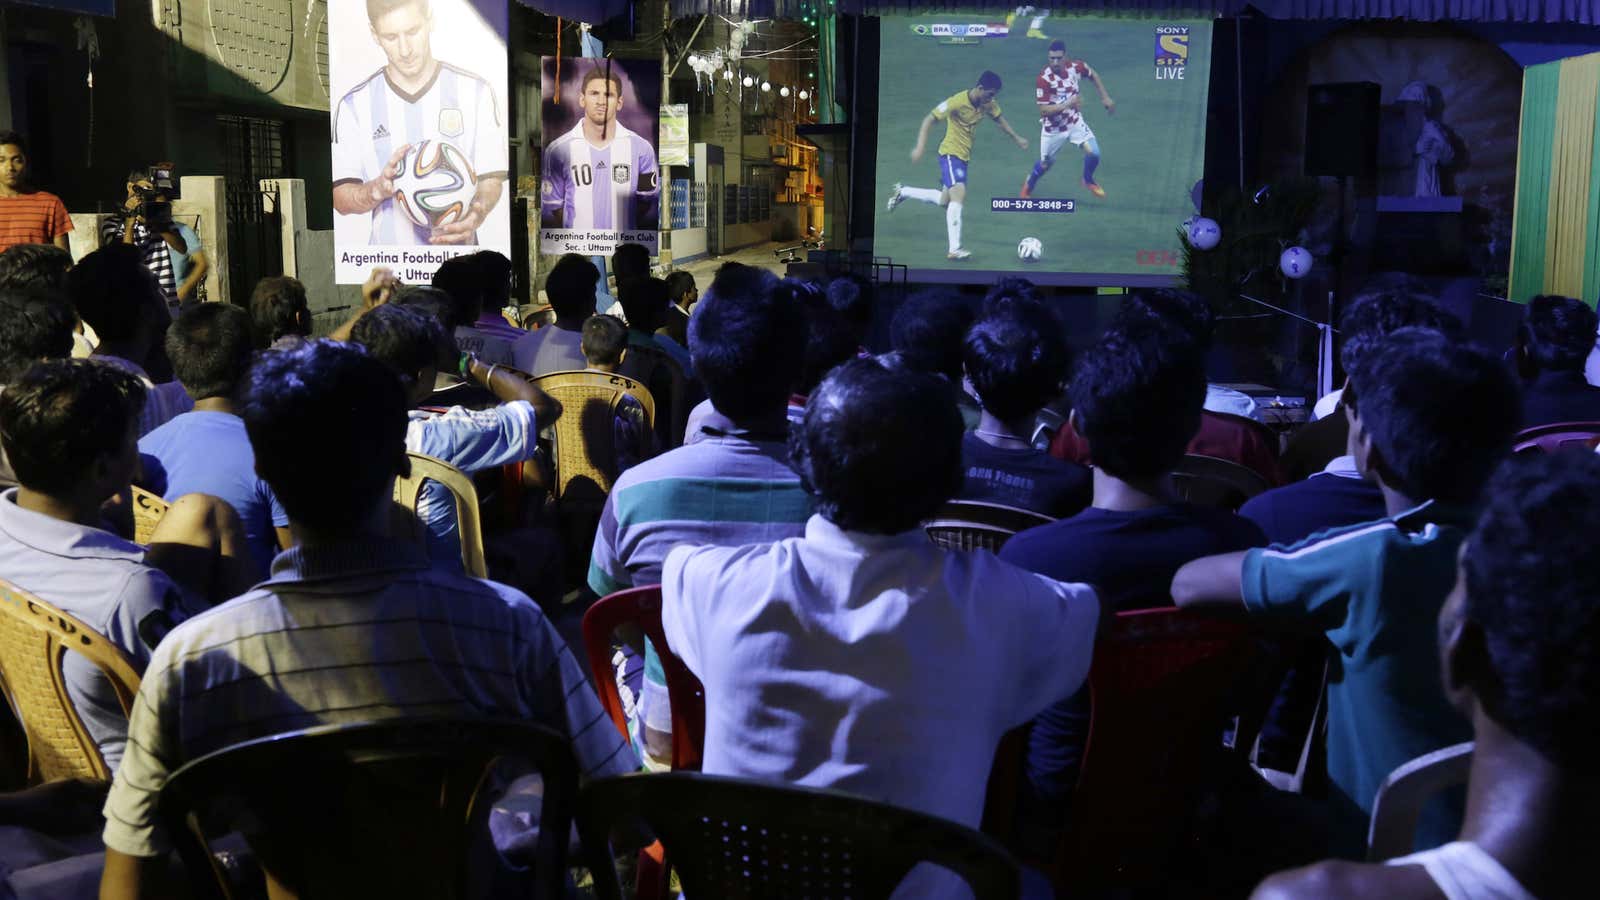 The official broadcaster wants people to watch World Cup on TV, not stream it illegally online.